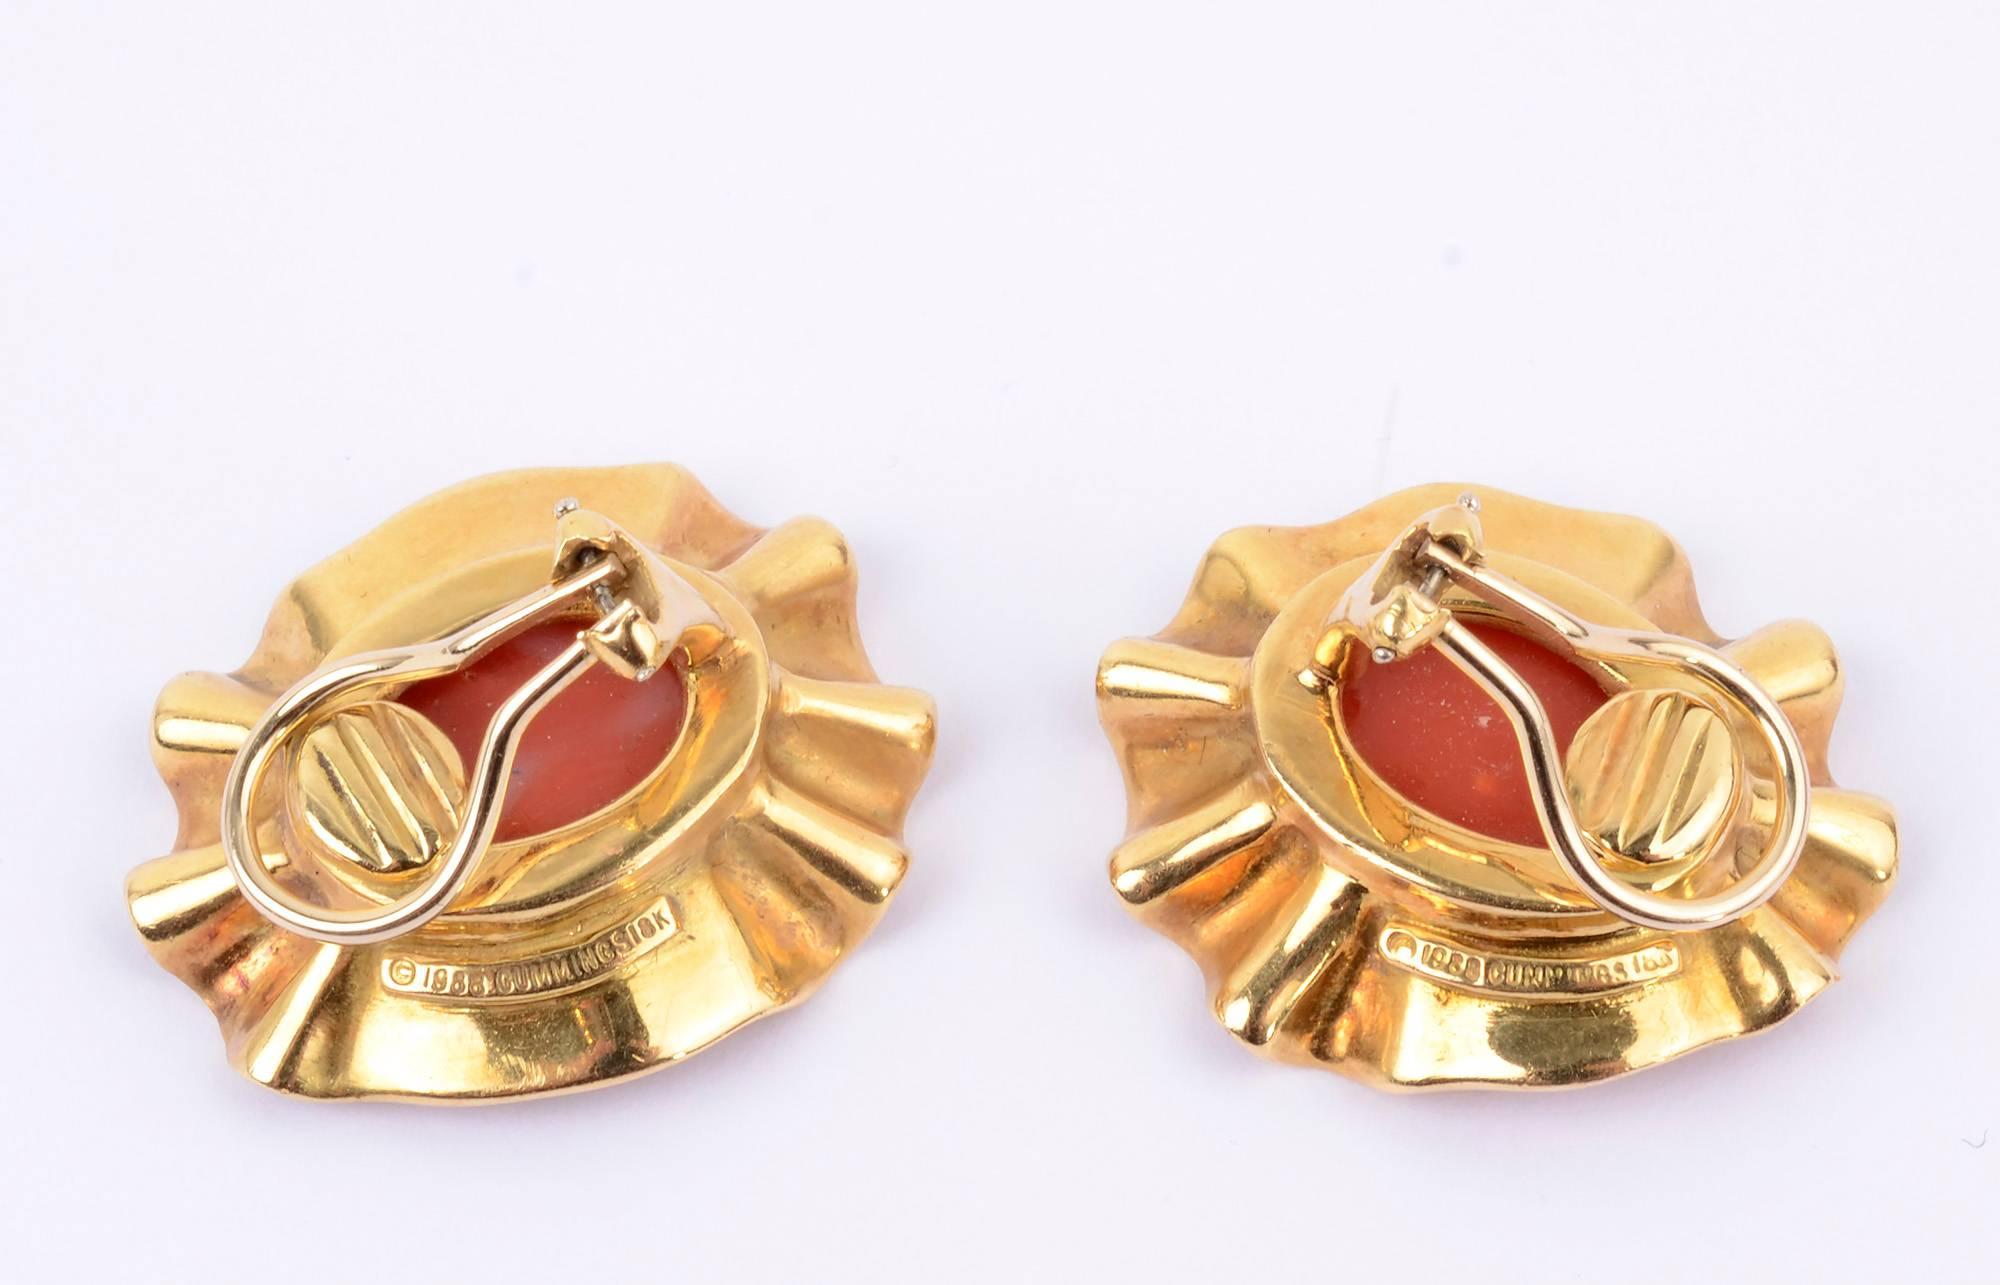 coral earrings gold designs